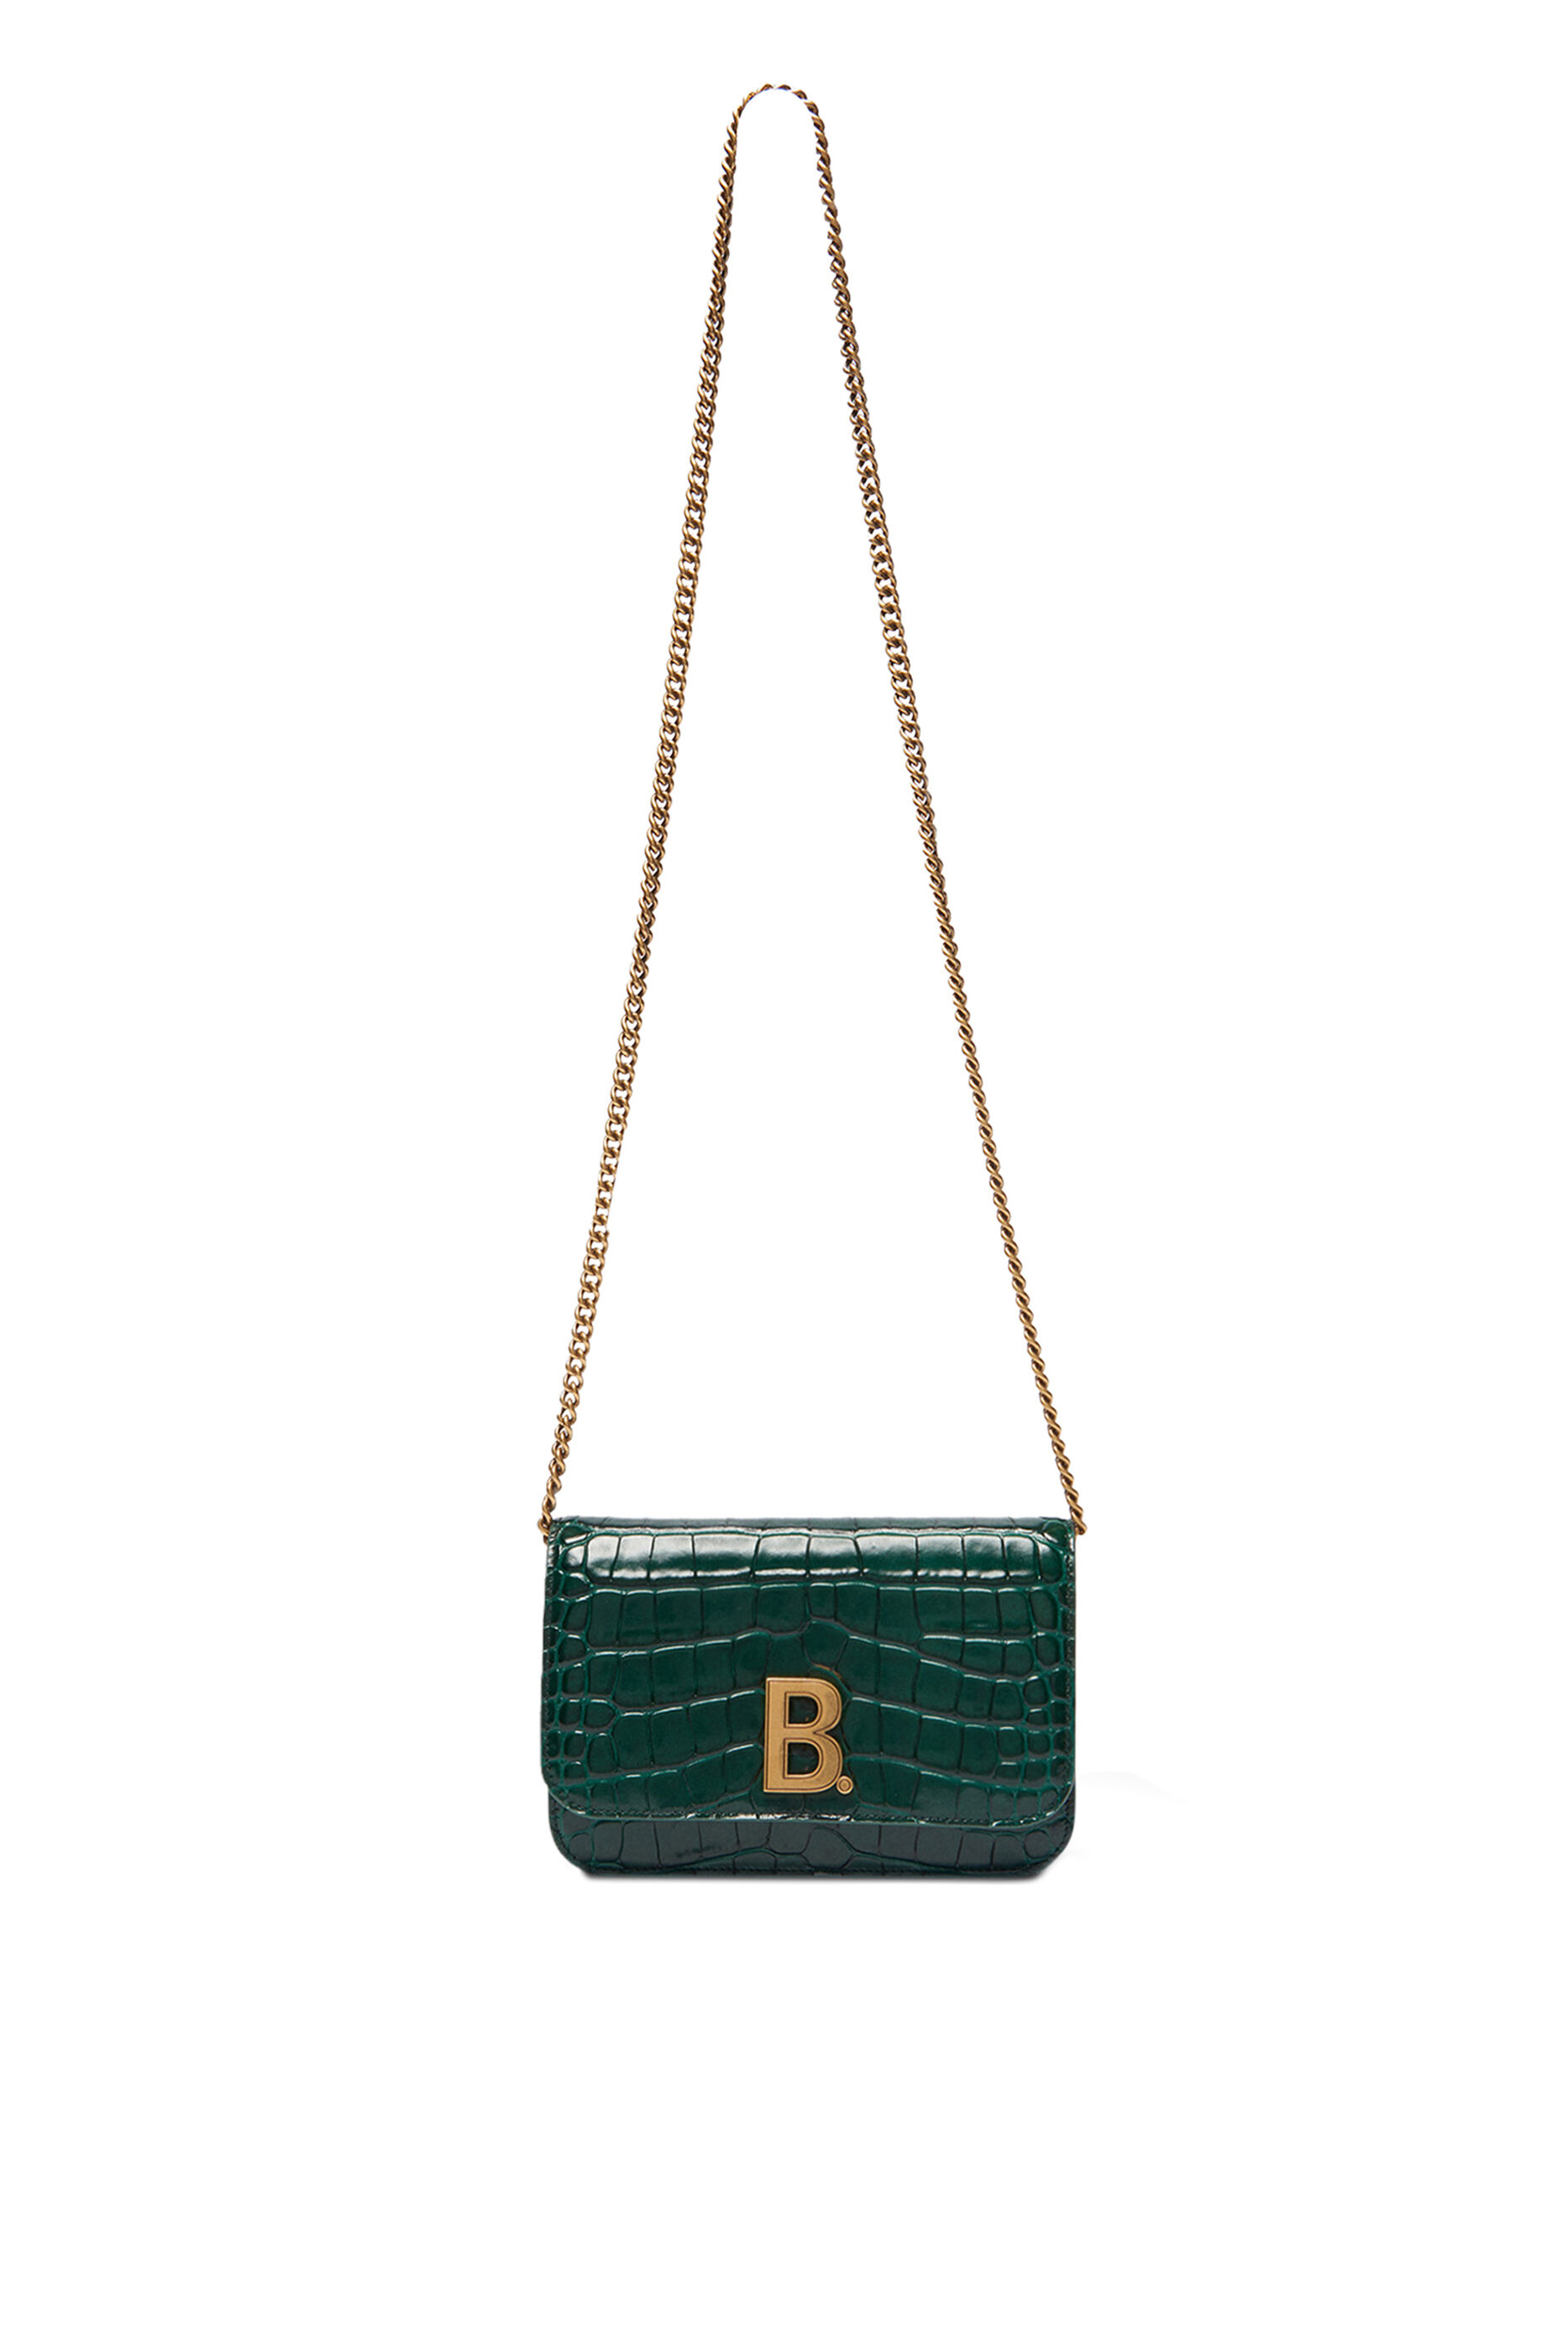 Balenciaga B Wallet Outlet Online, UP TO 66% OFF | www.aramanatural.es